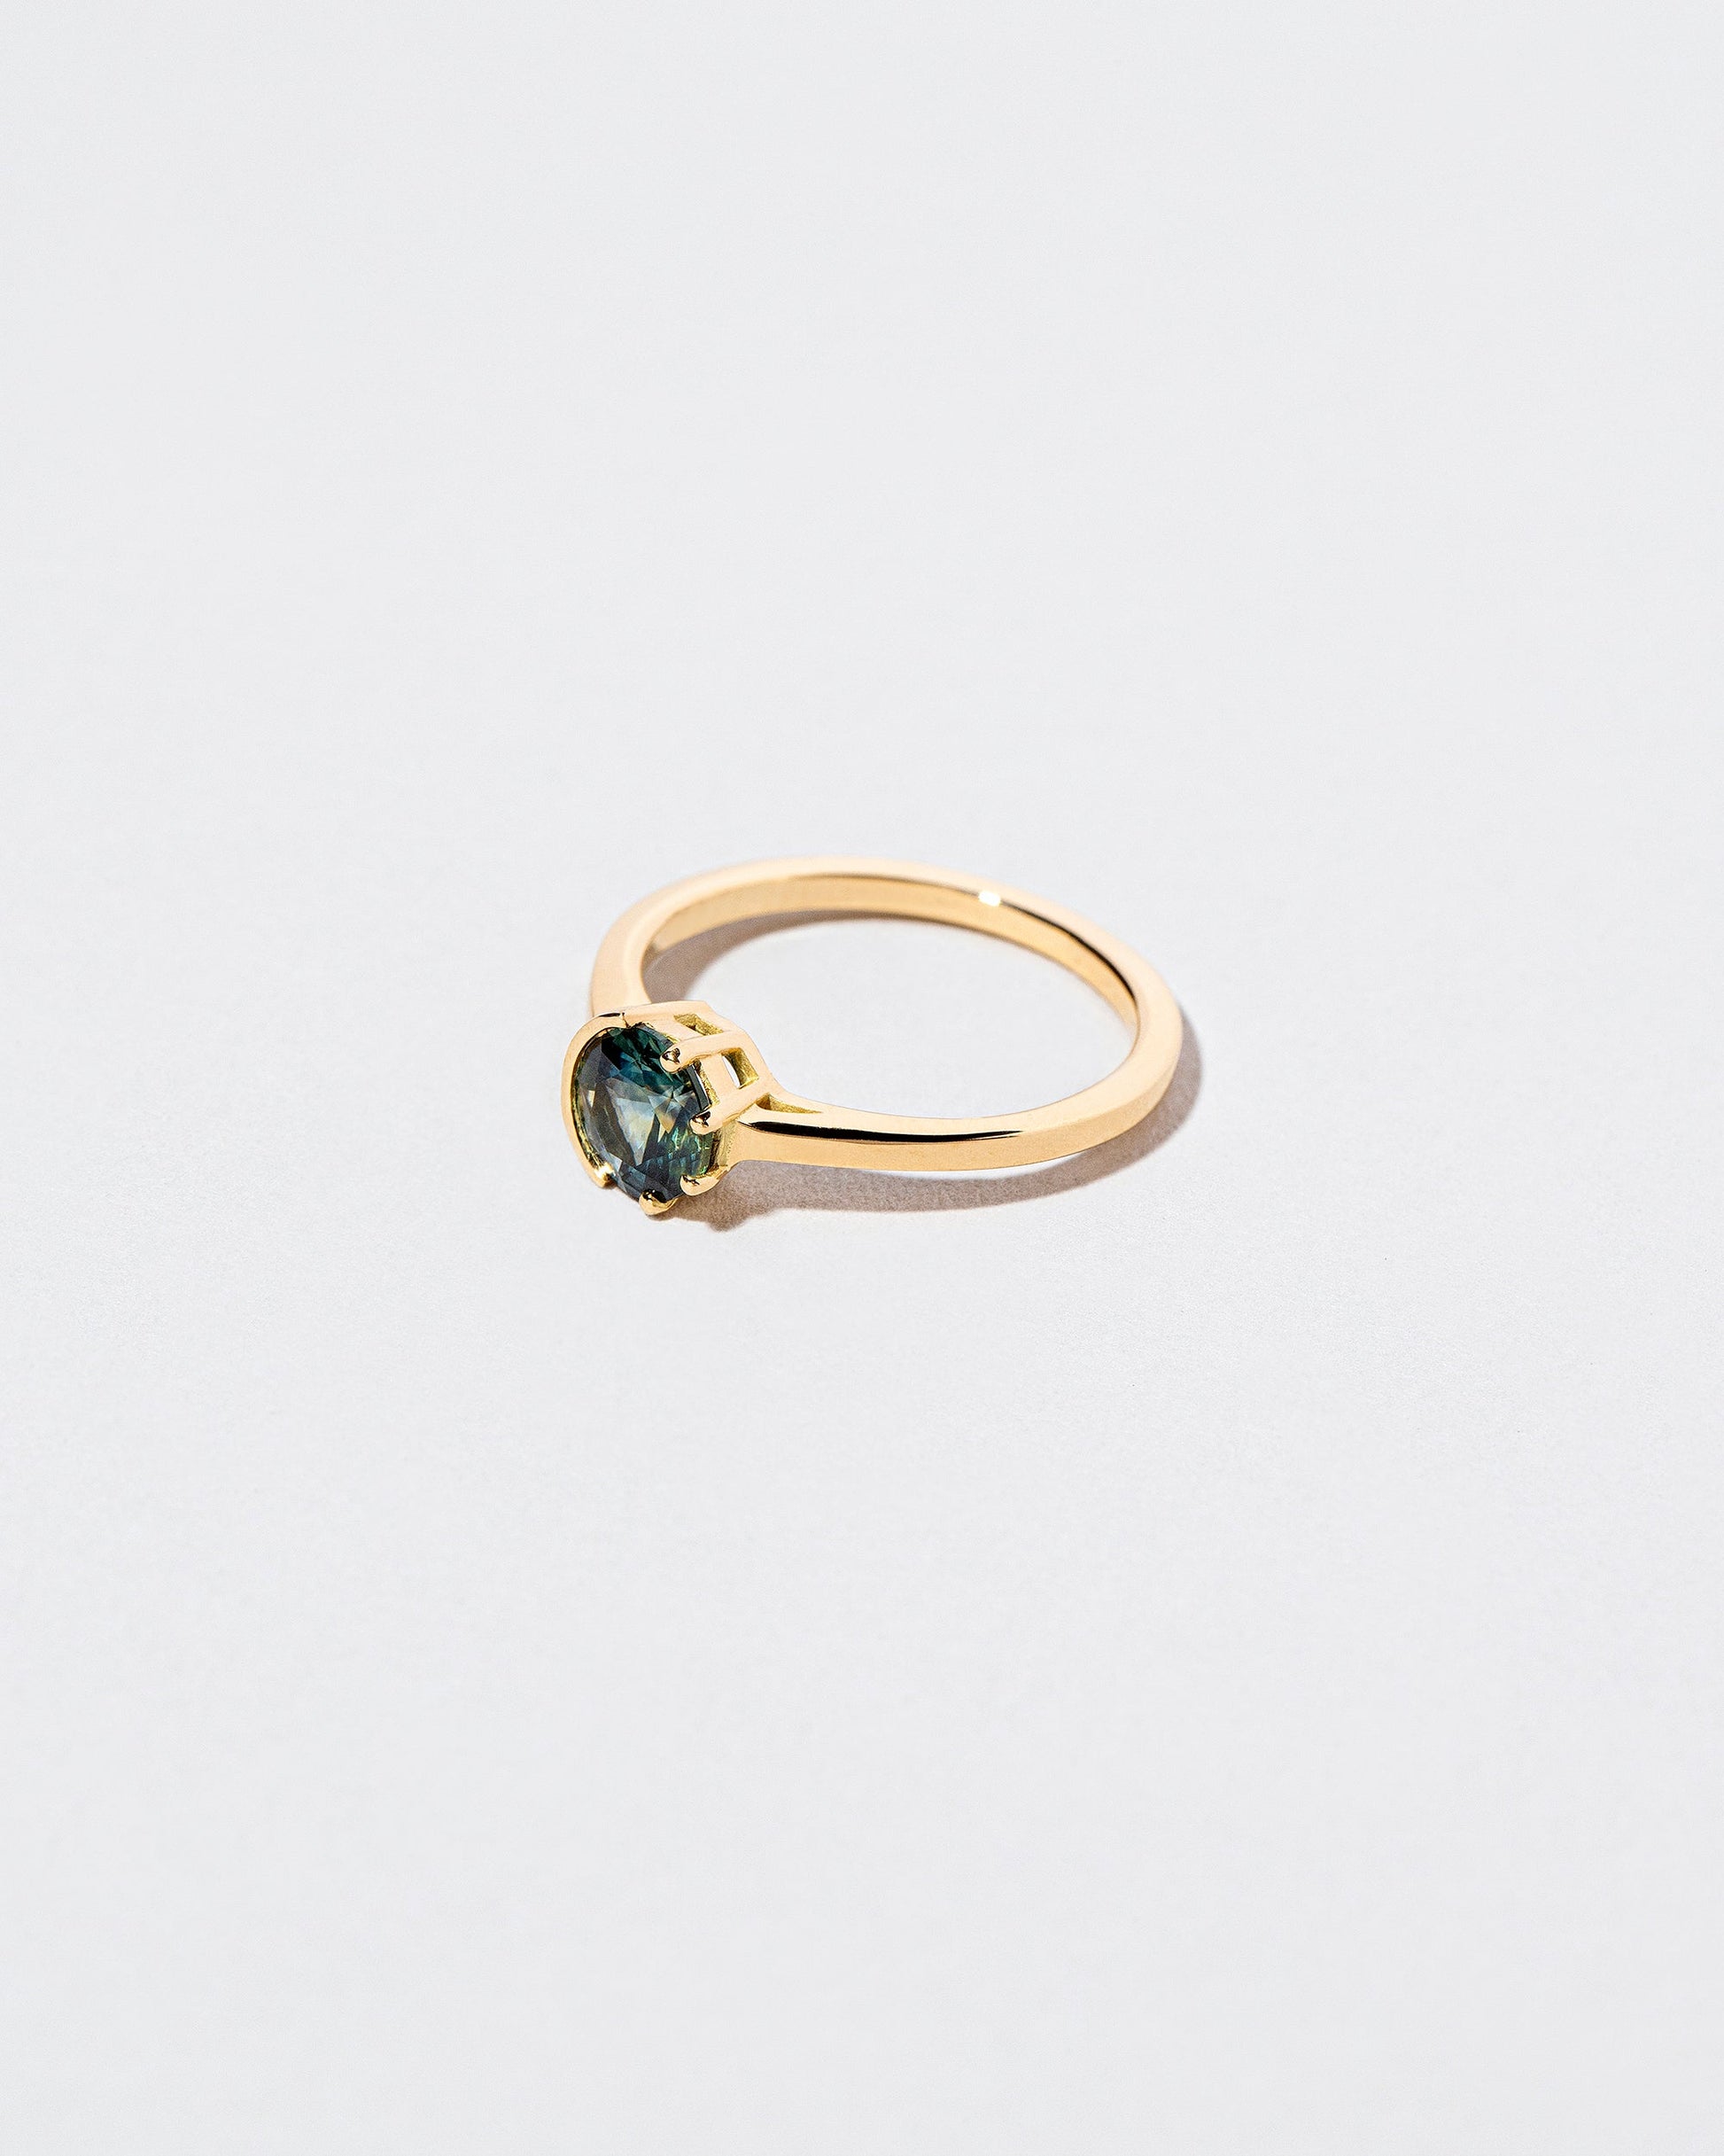  Sun & Moon Ring - Bicolor Teal Sapphire on light color background.